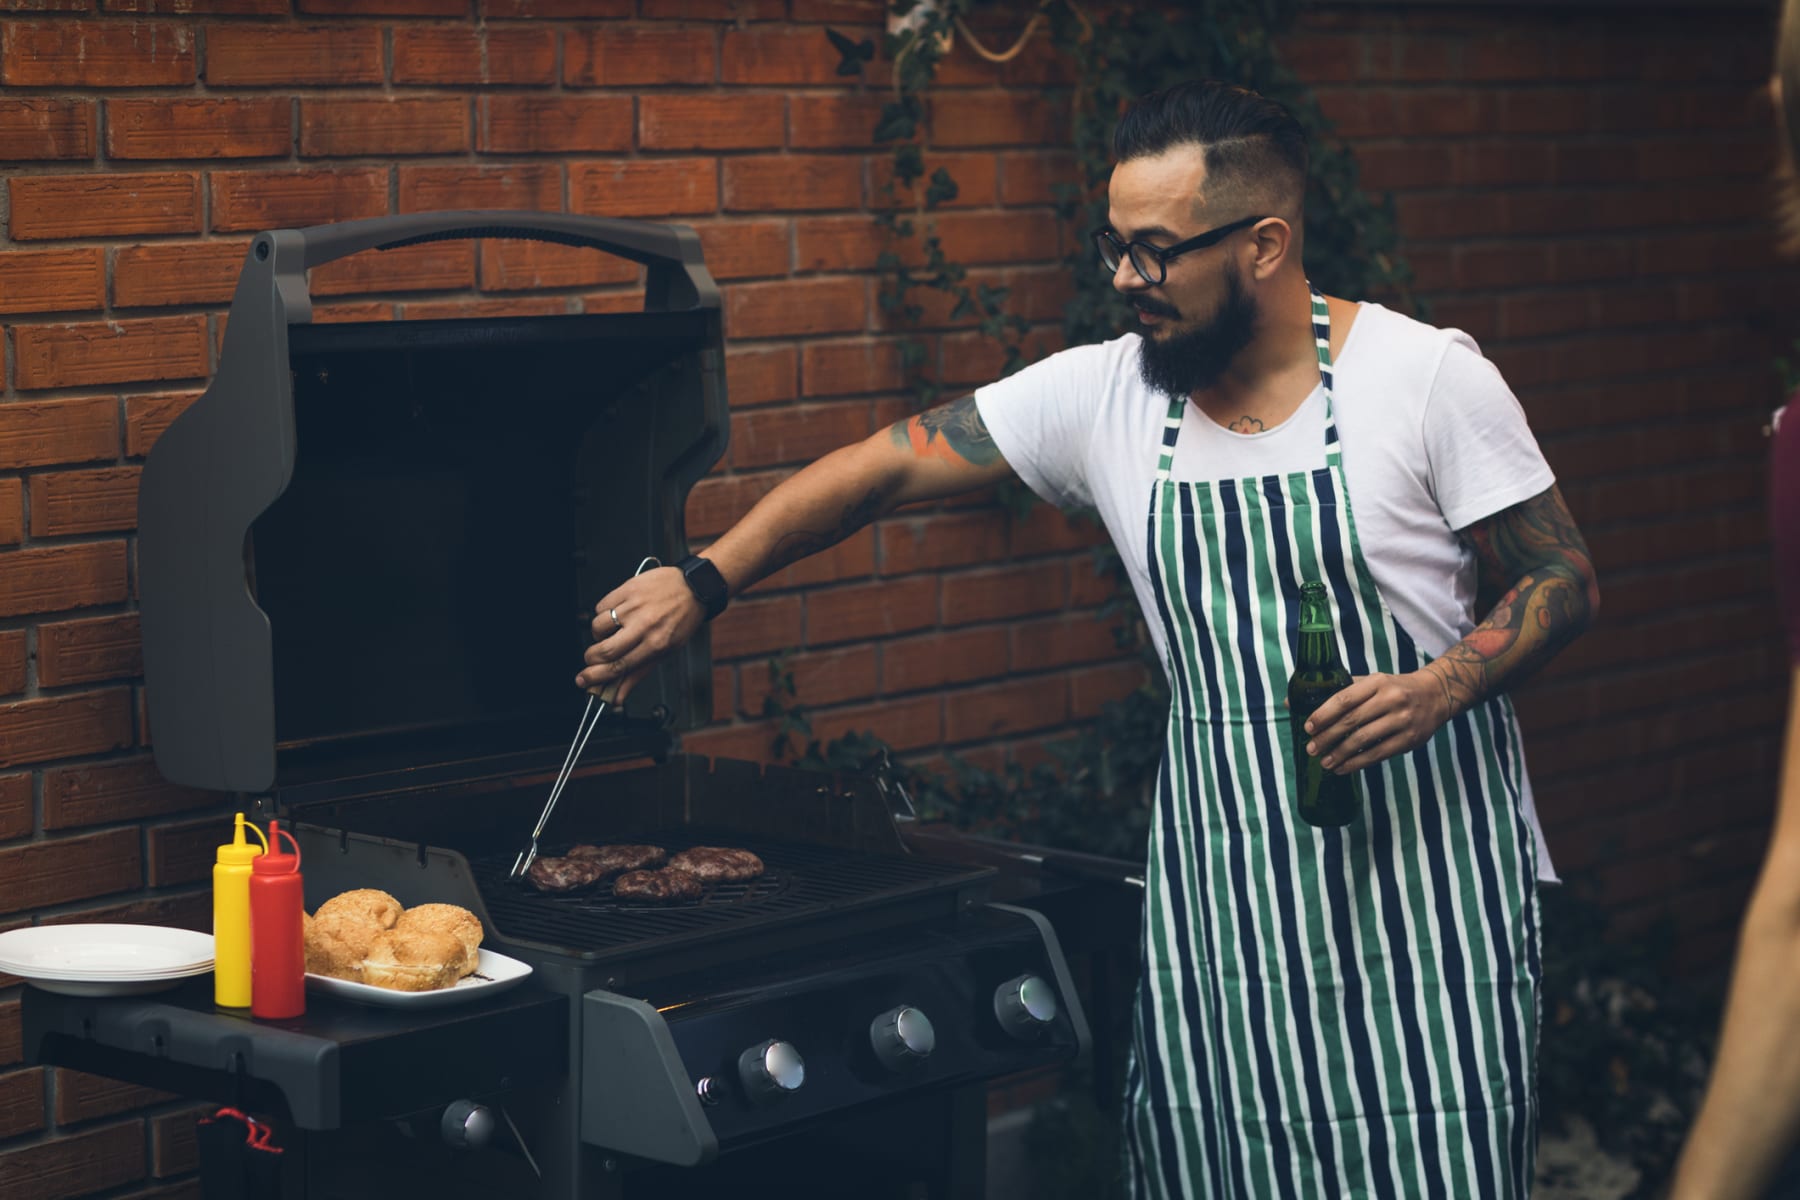 A man cooks burgers on an outdoor grill.